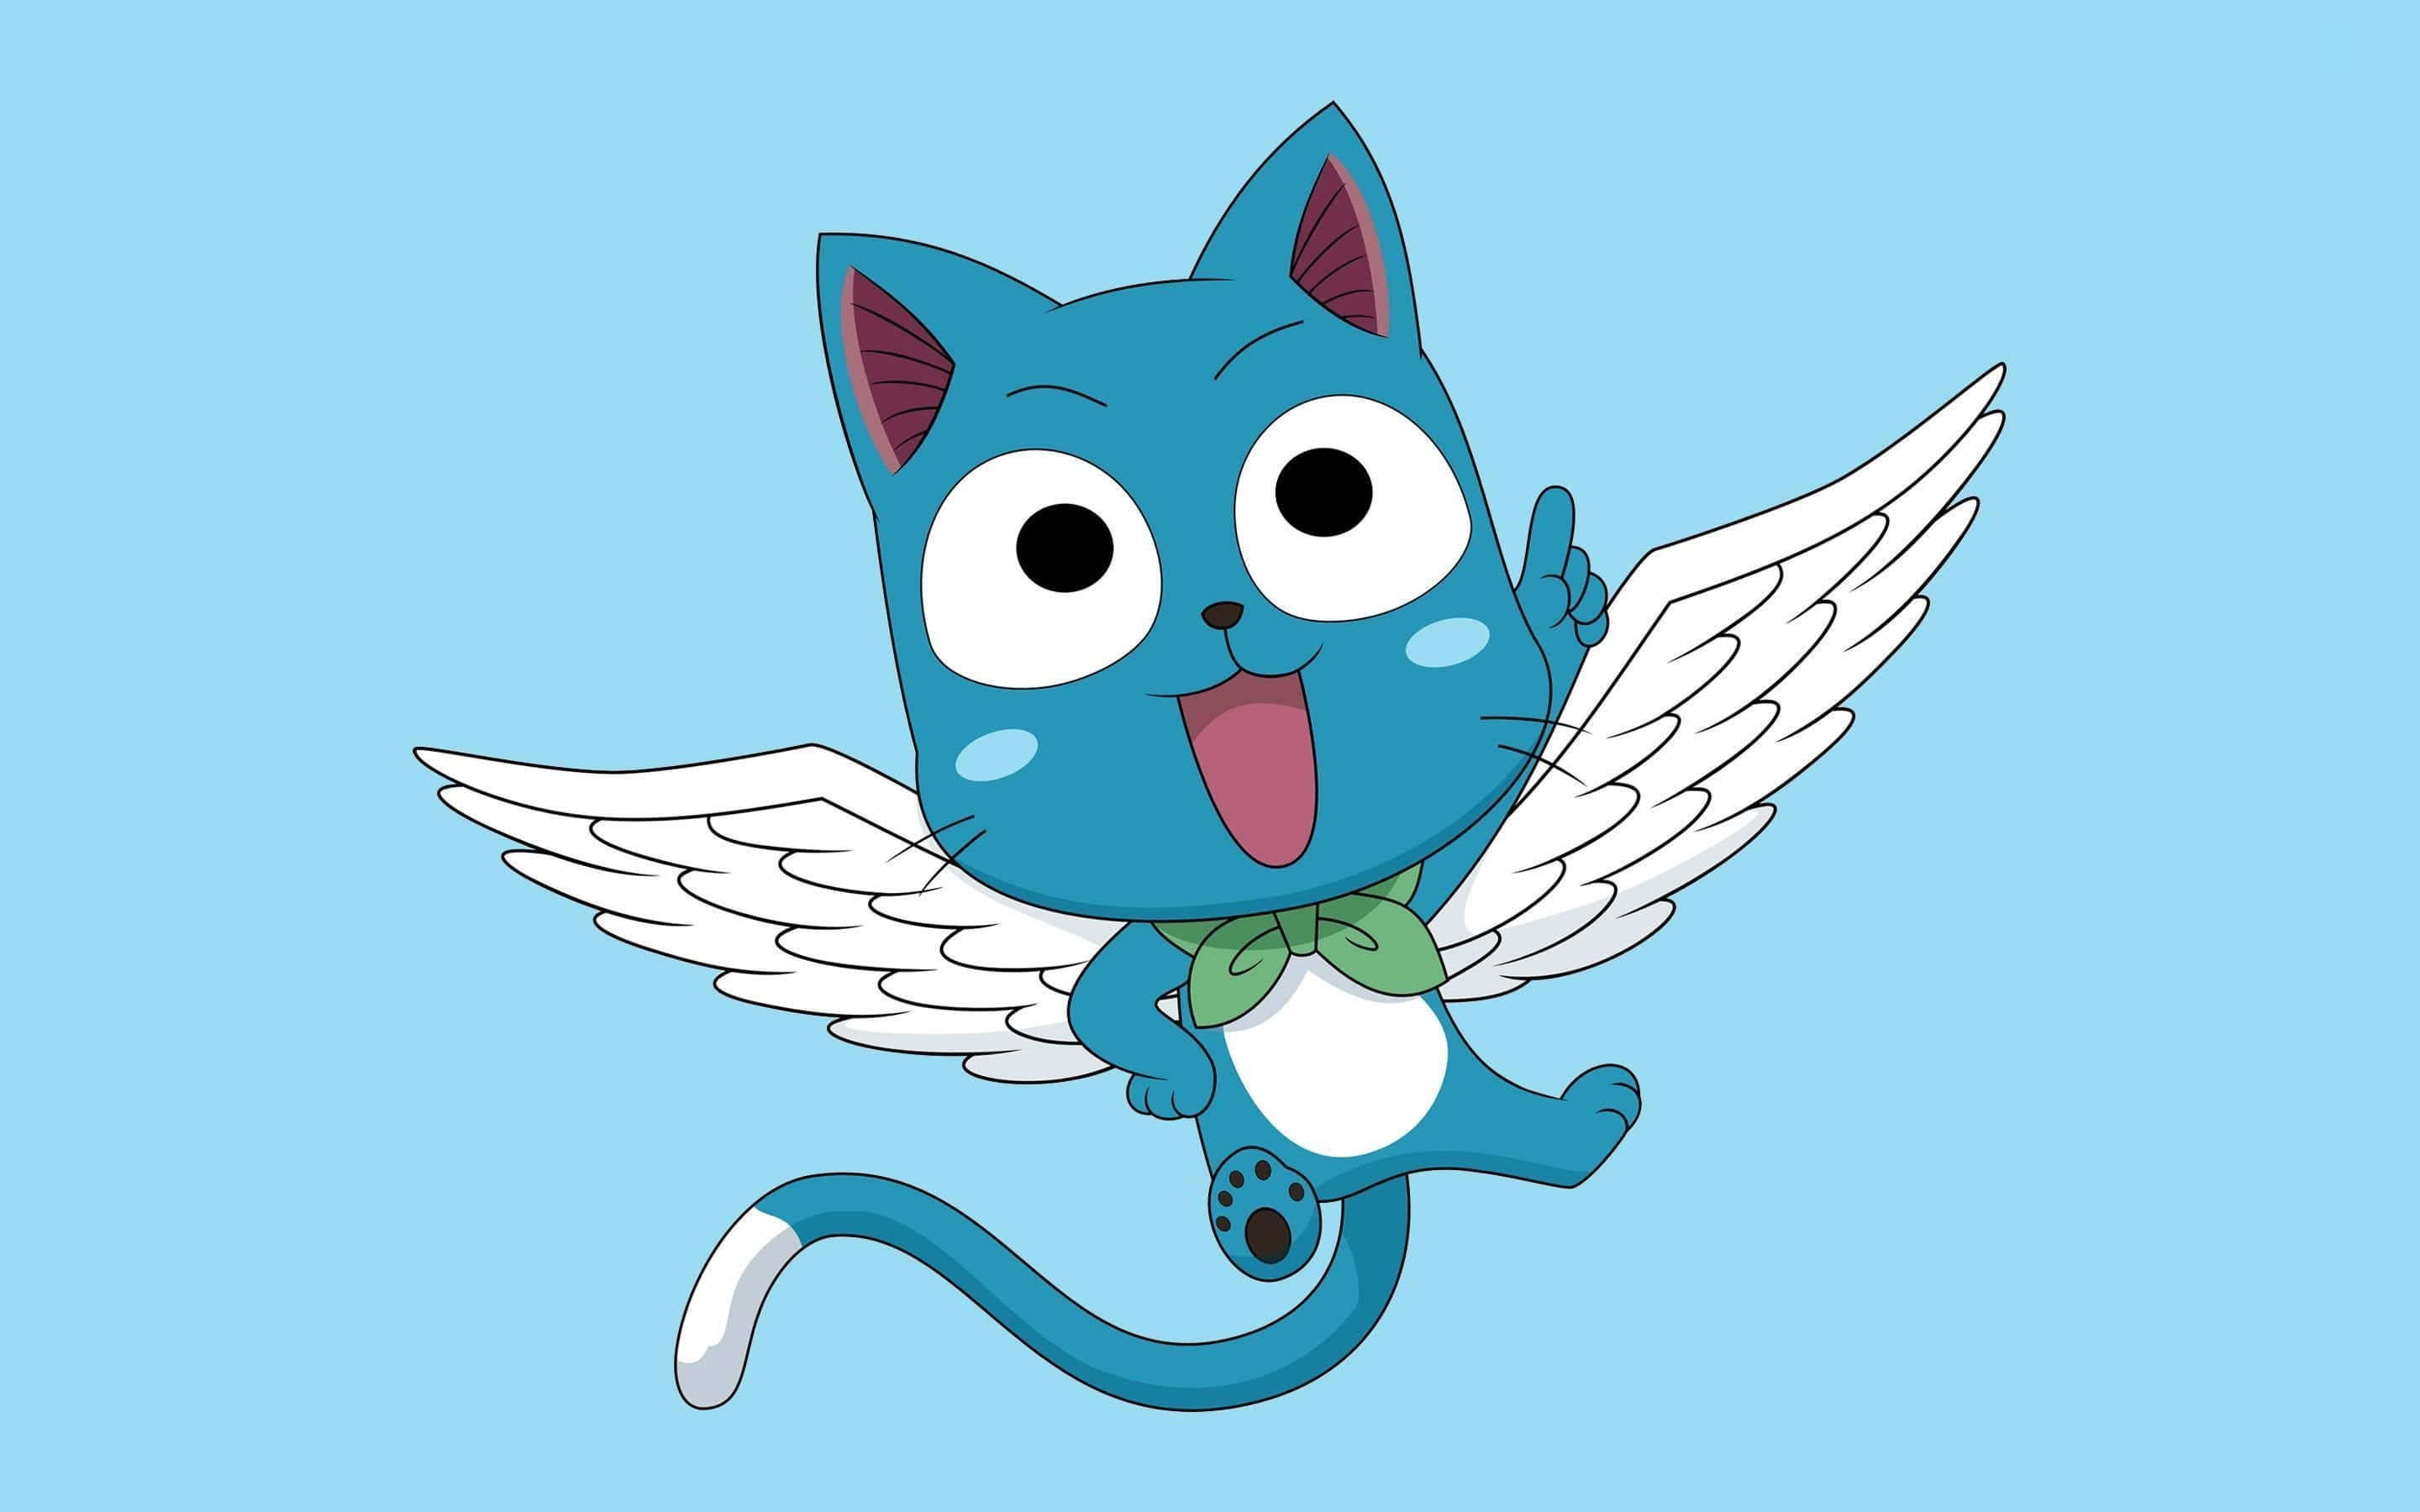 Happy, the beloved blue cat from Fairy Tail, flying on a magical background. Wallpaper